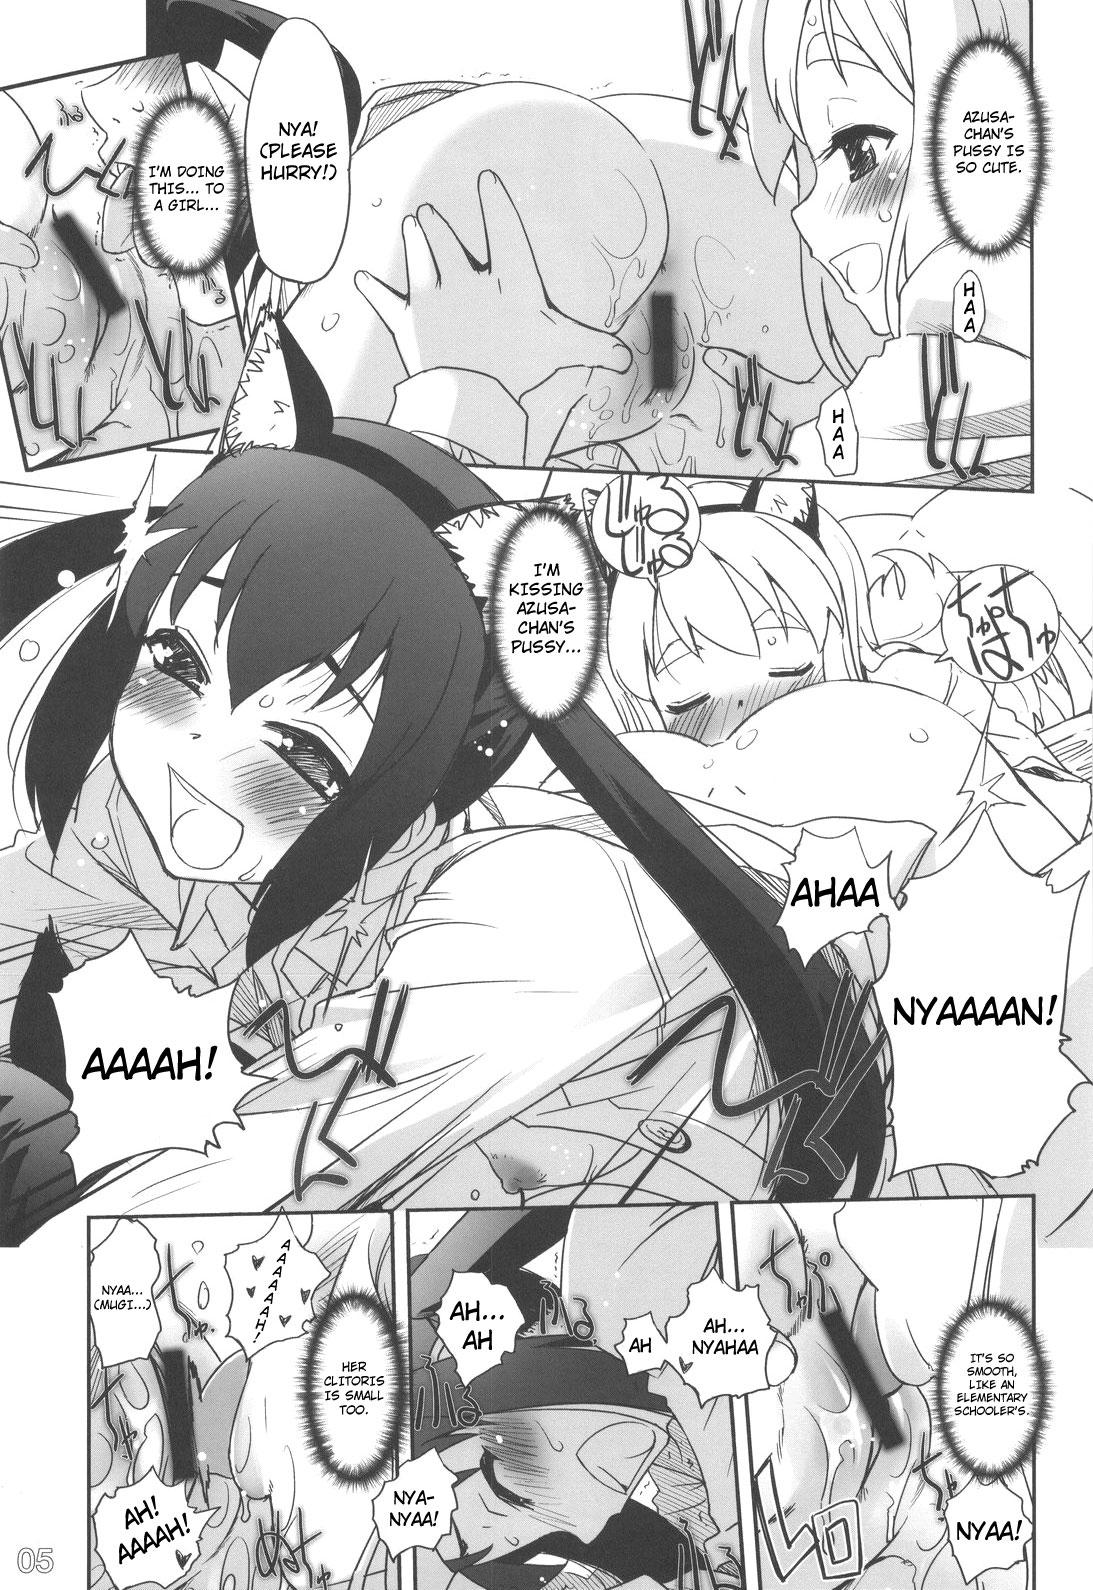 Telugu Nekomimi to Toilet to Houkago no Bushitsu | Cat Ears And A Restroom And The Club Room After School - K on Chastity - Page 4